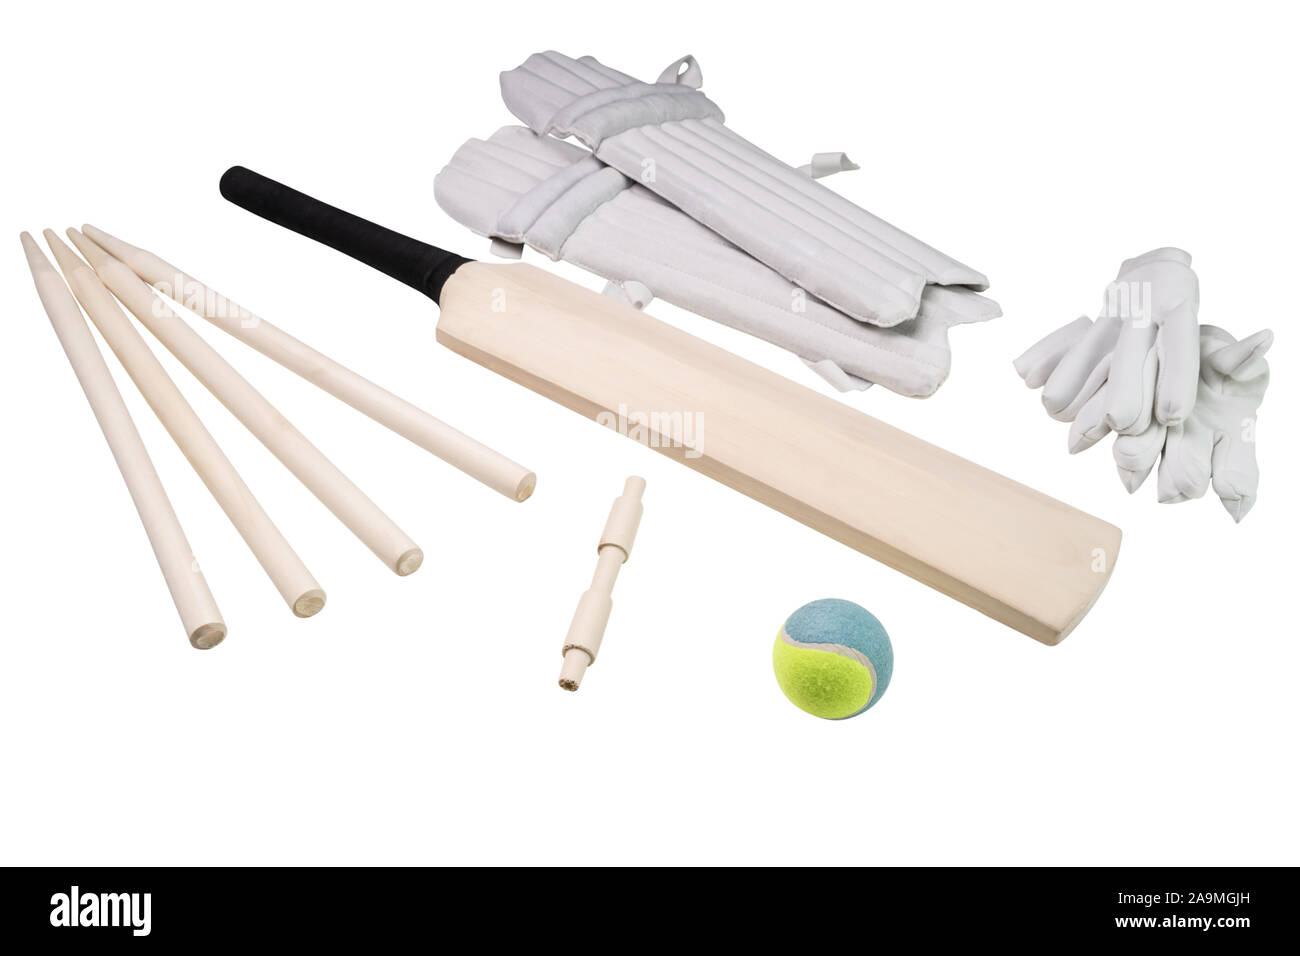 Overhead View Of Cricket Accessories And Tools Isolated On White